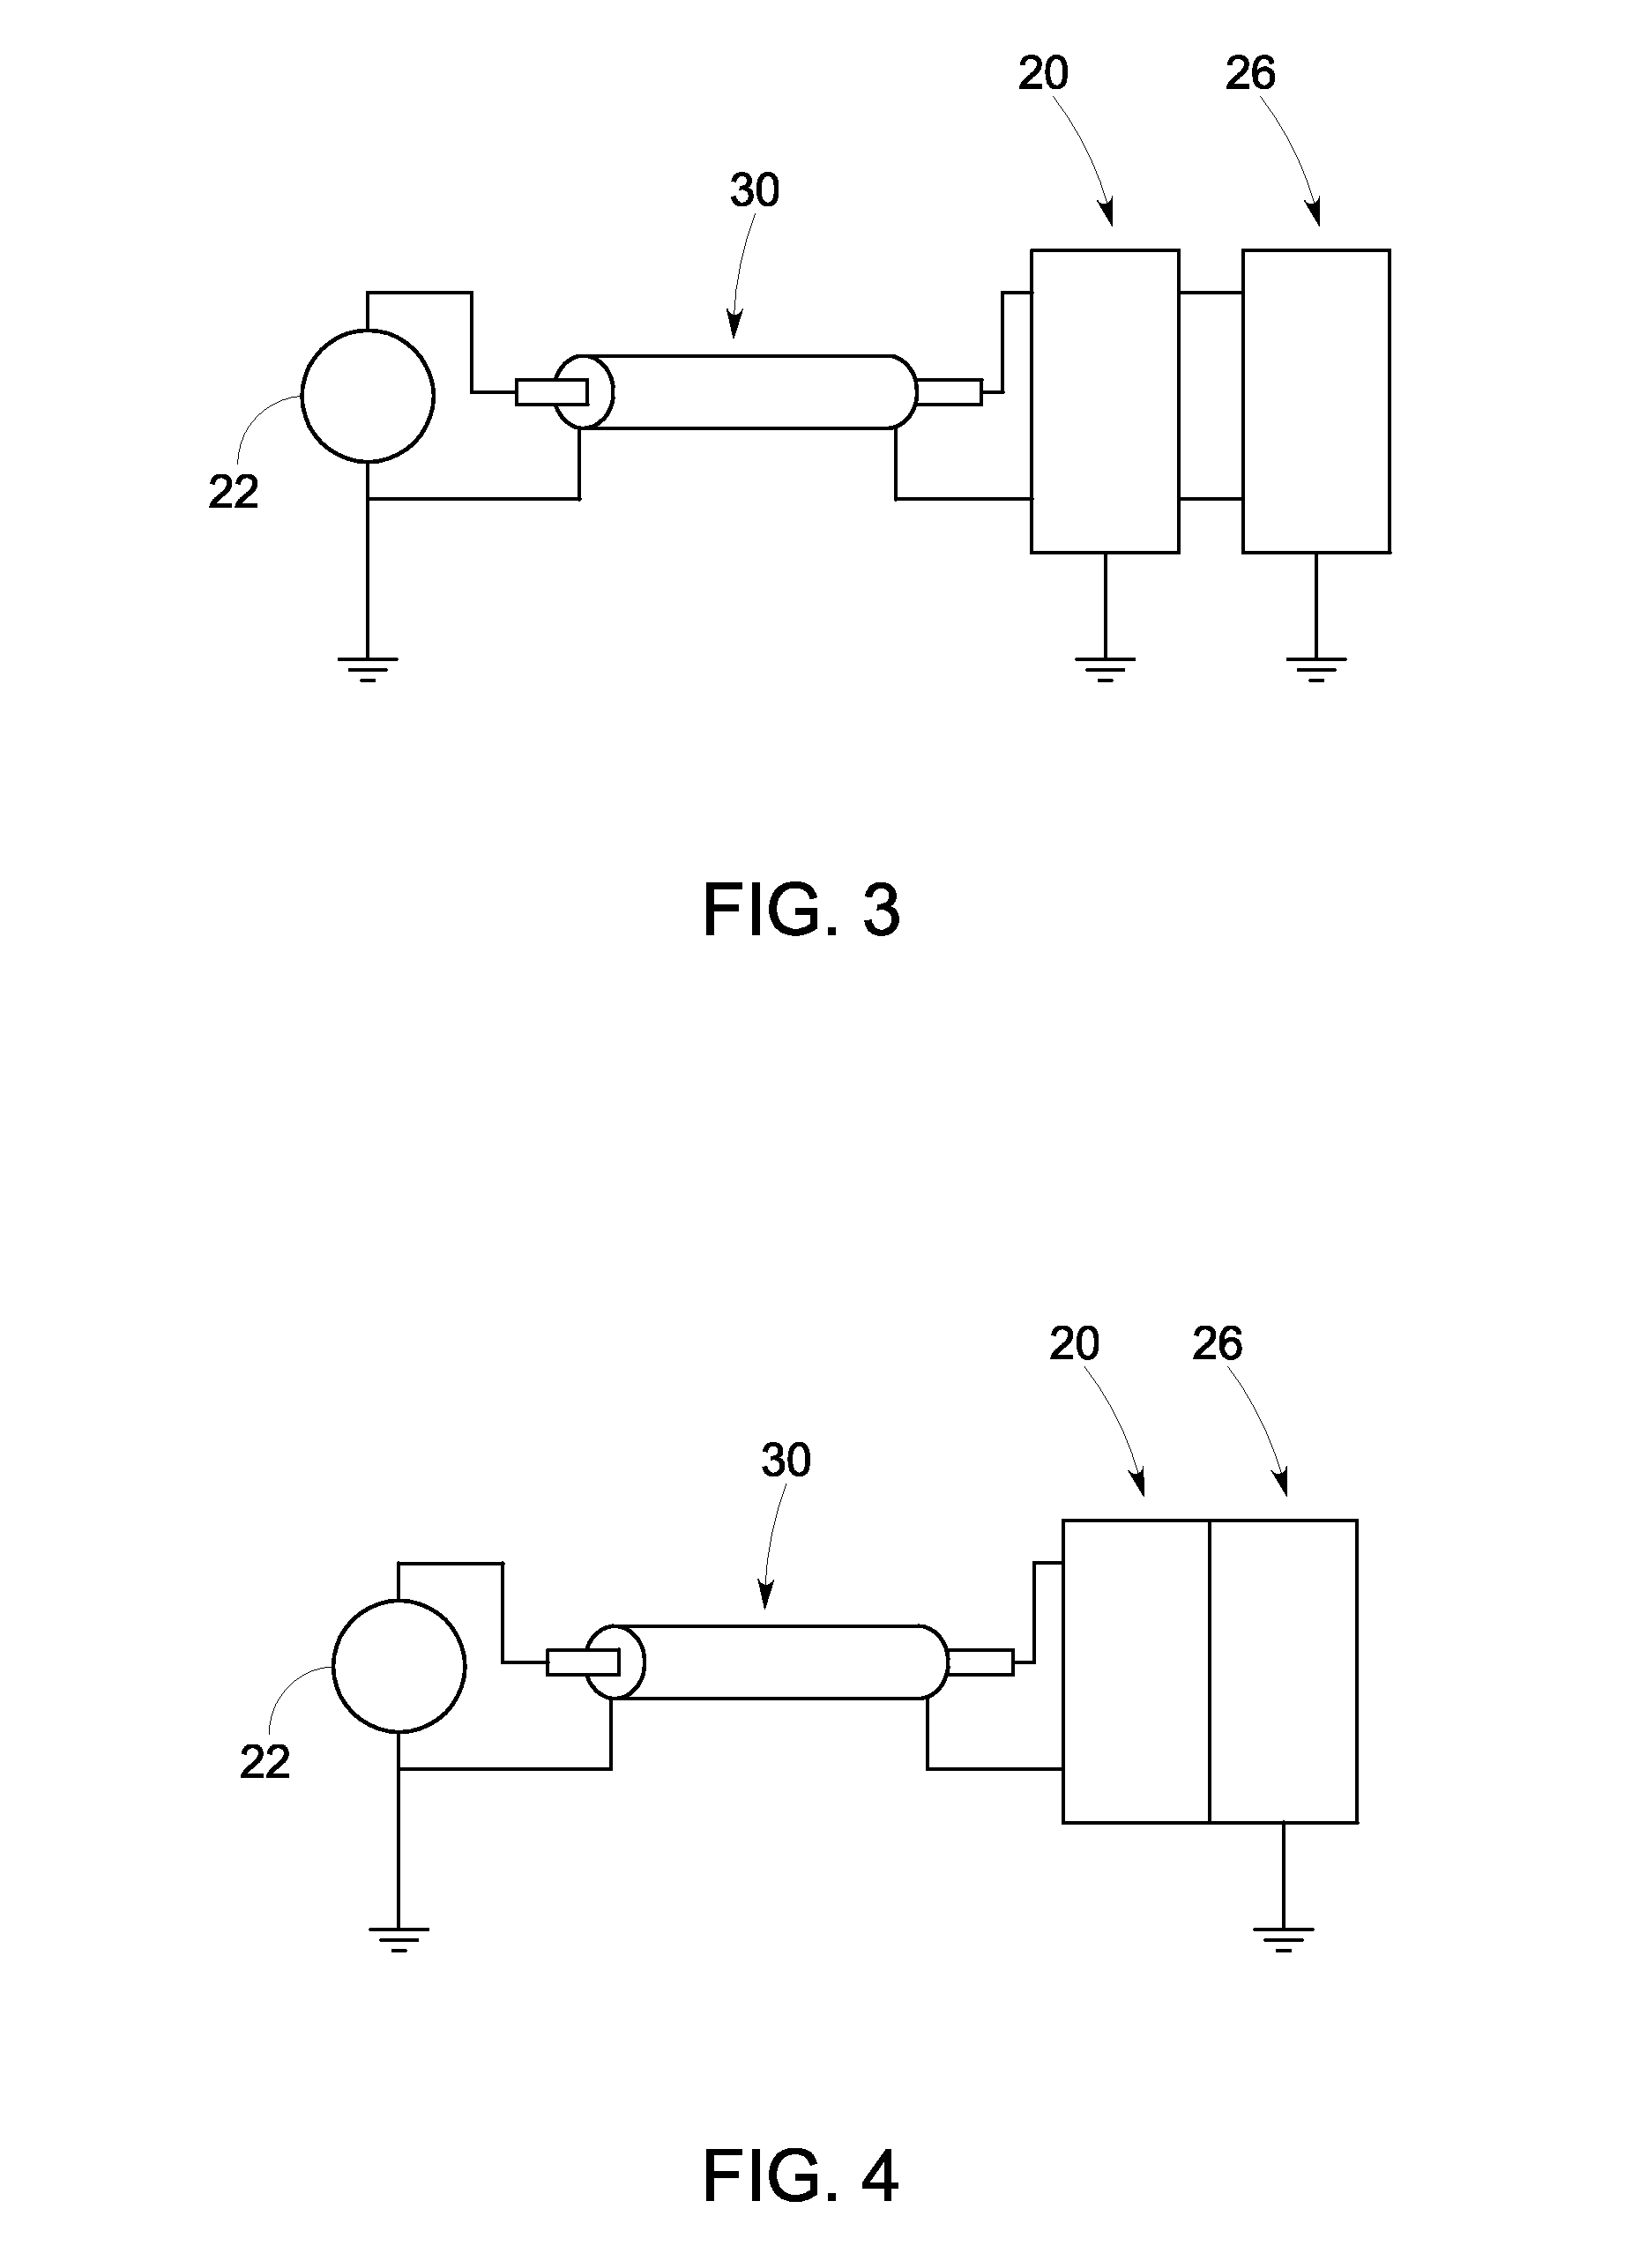 Method and system for passive resonant voltage switching